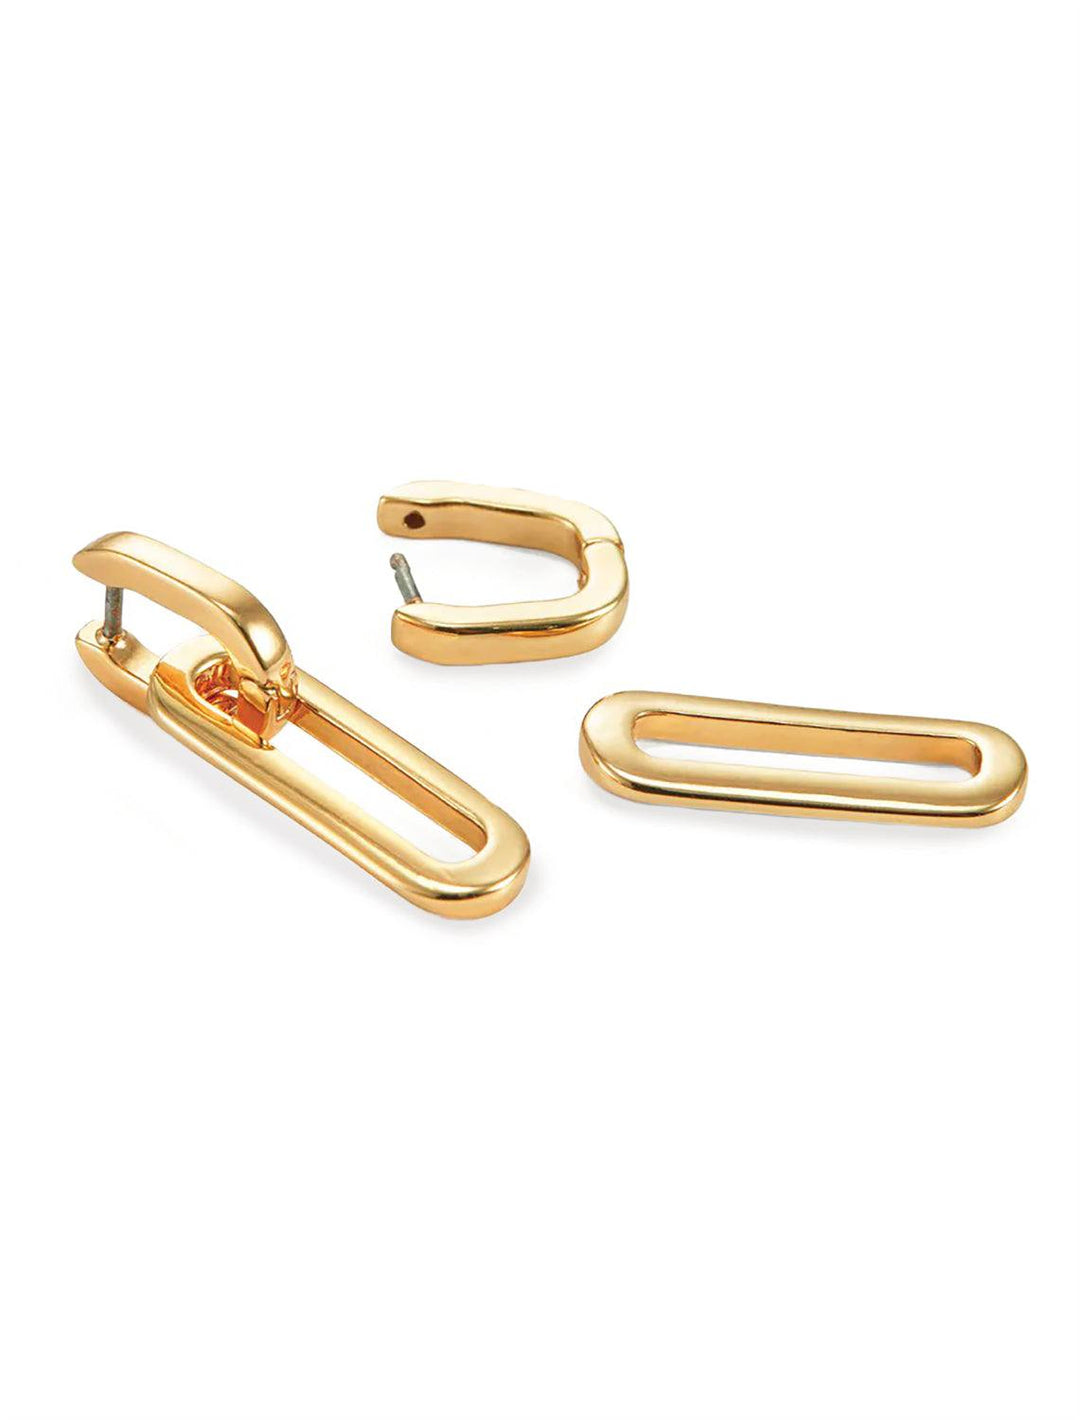 Side angle view of Jenny Bird's Teeni Detachable Link Earrings in Gold Tone Dipped Brass in the "detached" state.